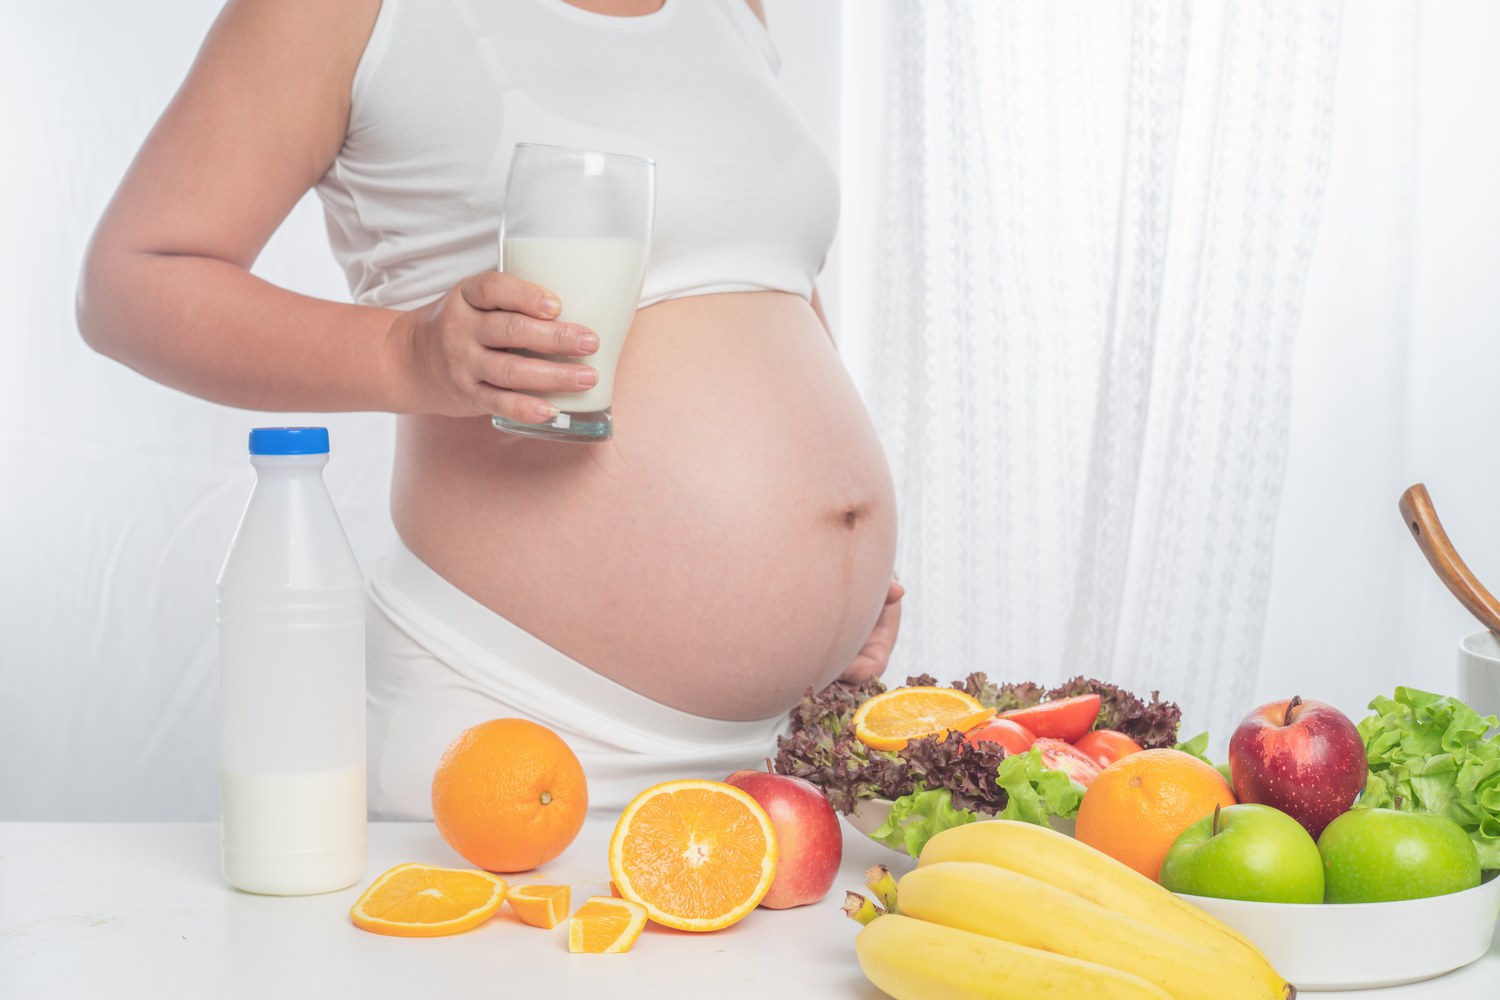 Healthy eating and twin pregnancy